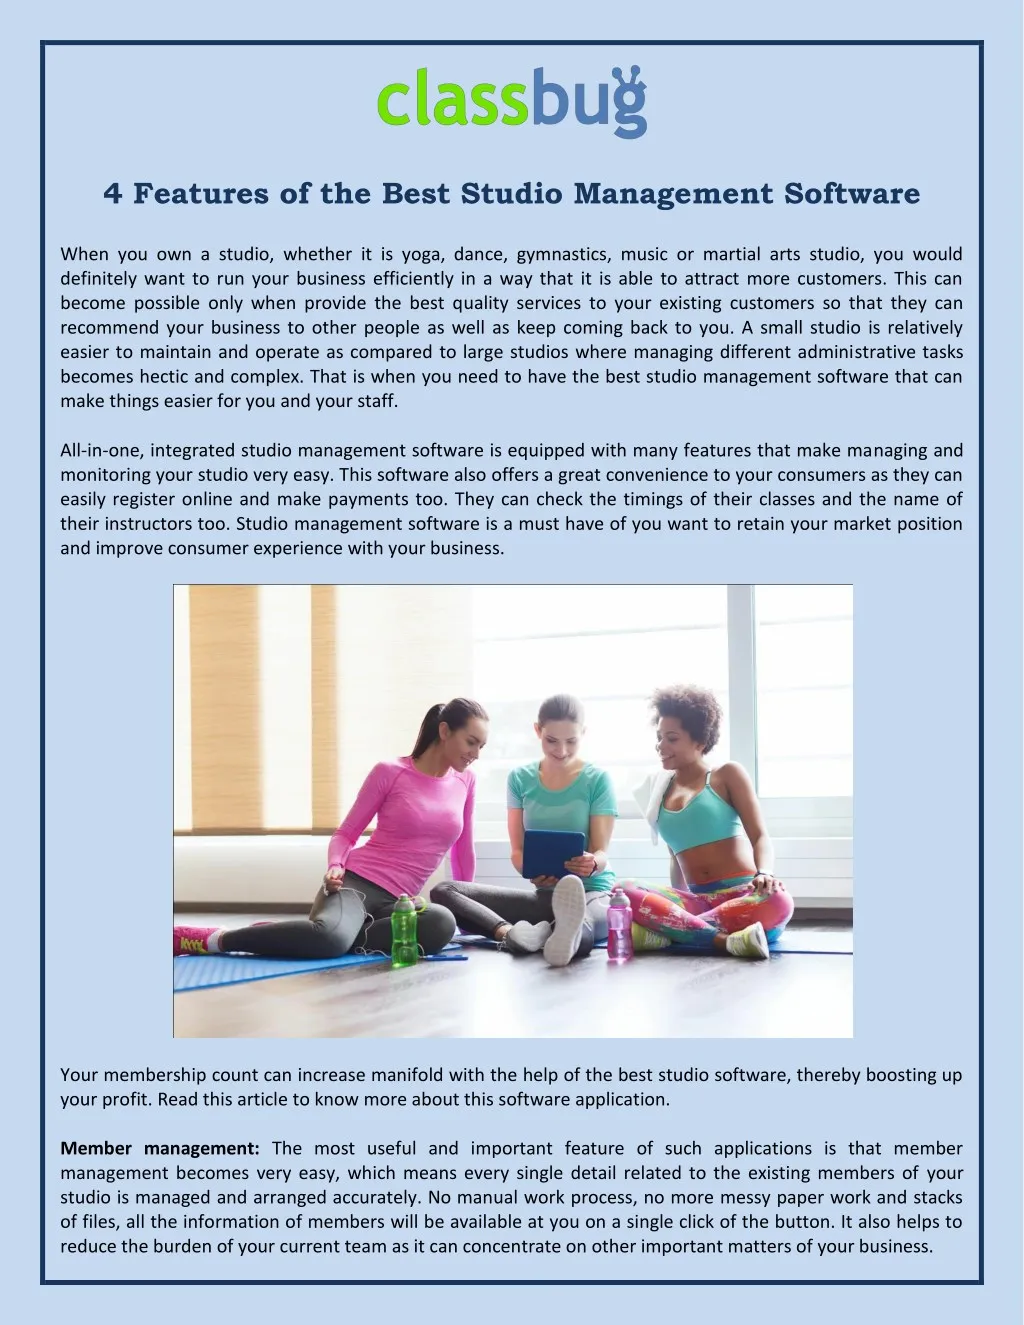 4 features of the best studio management software